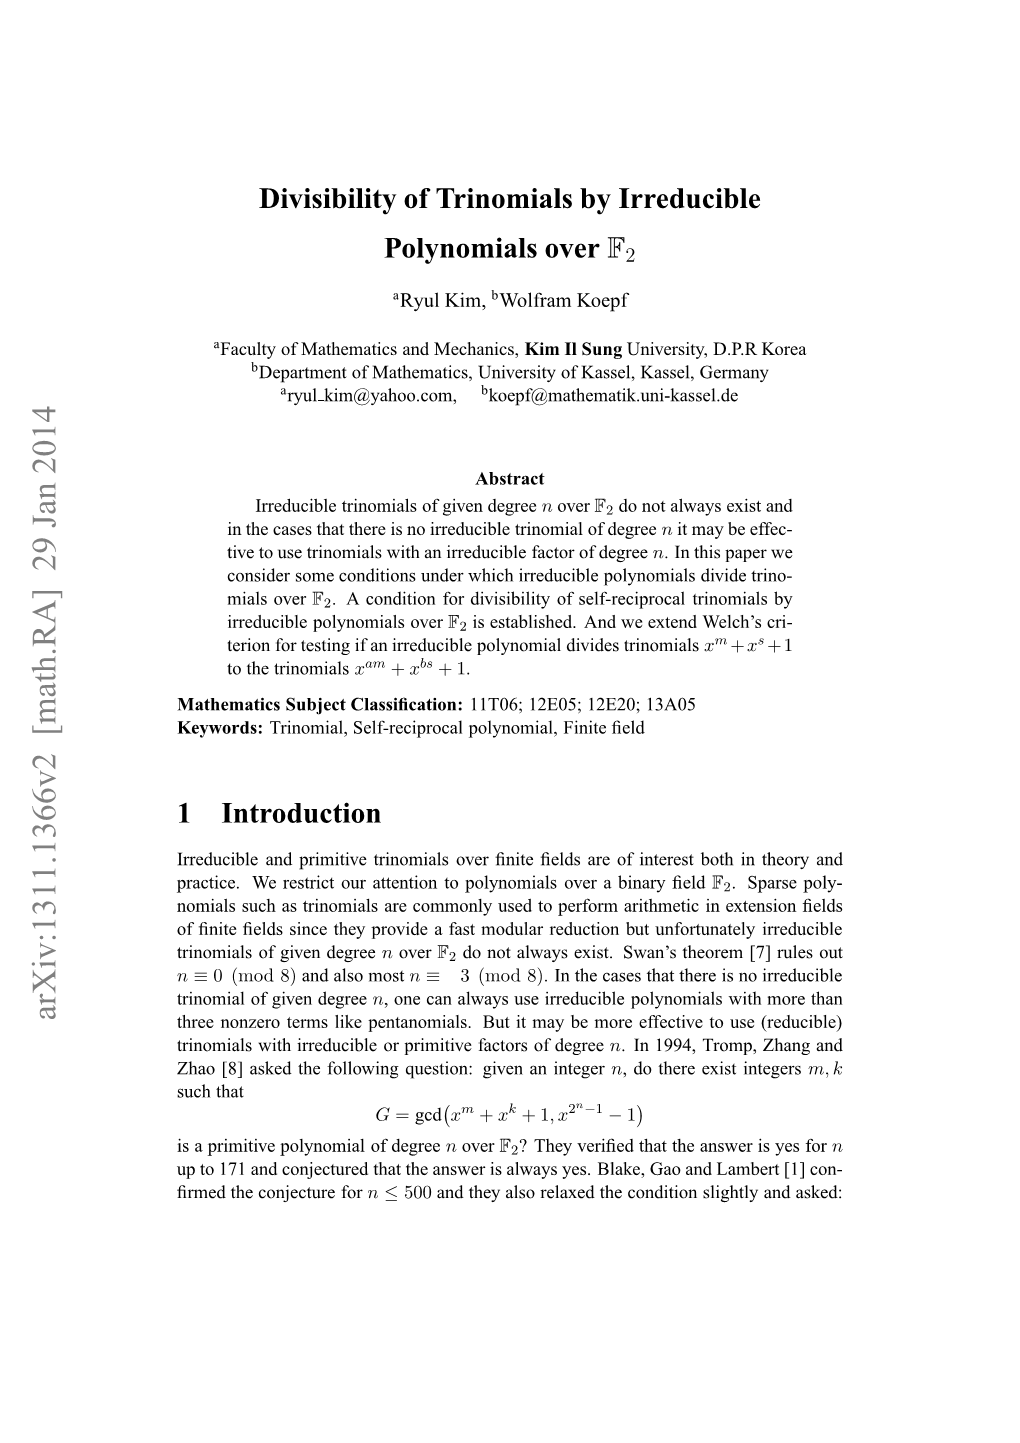 Divisibility of Trinomials by Irreducible Polynomials Over F2